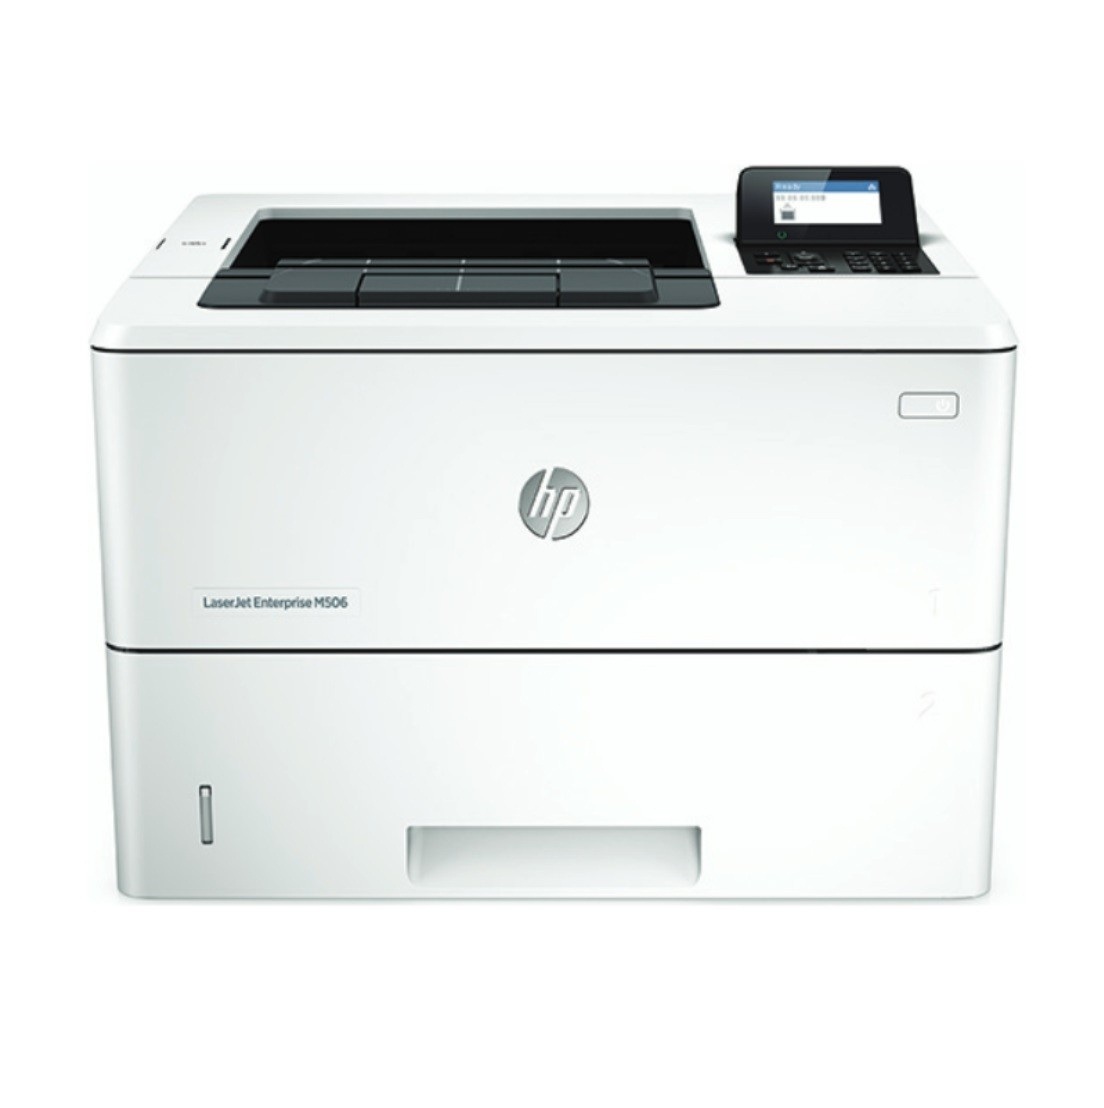 ma´y-in-laser-den-tra´ng-hp-m402d